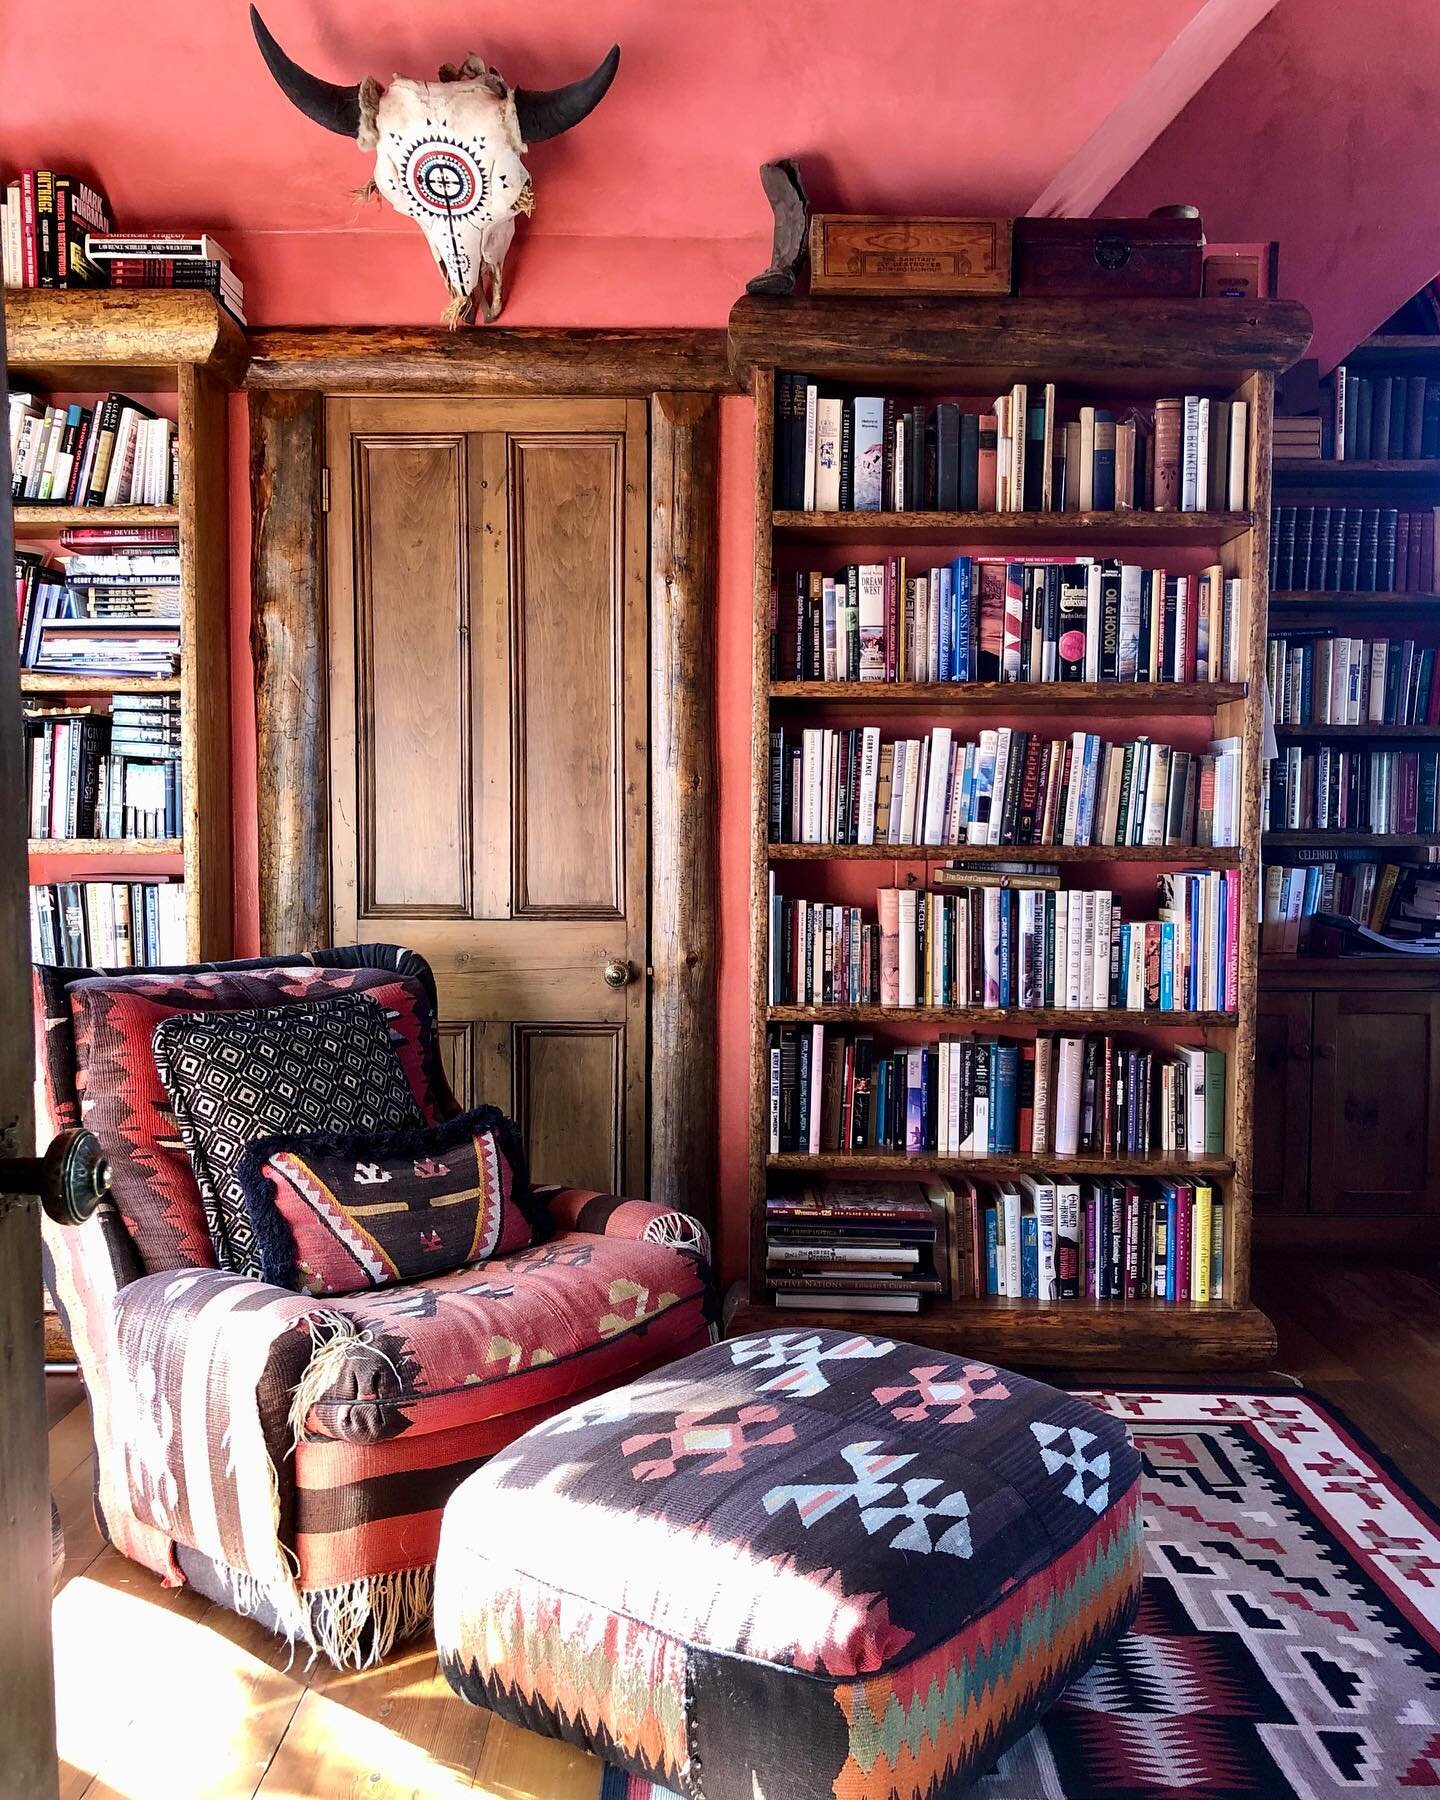 This home has surprises everywhere - a secret passage behind a bookcase here, a spiral staircase going up to a tiny cushioned reading nook there. It's an ordinary reading collection...until I randomly come upon a first edition of Steinbeck or Hemingw